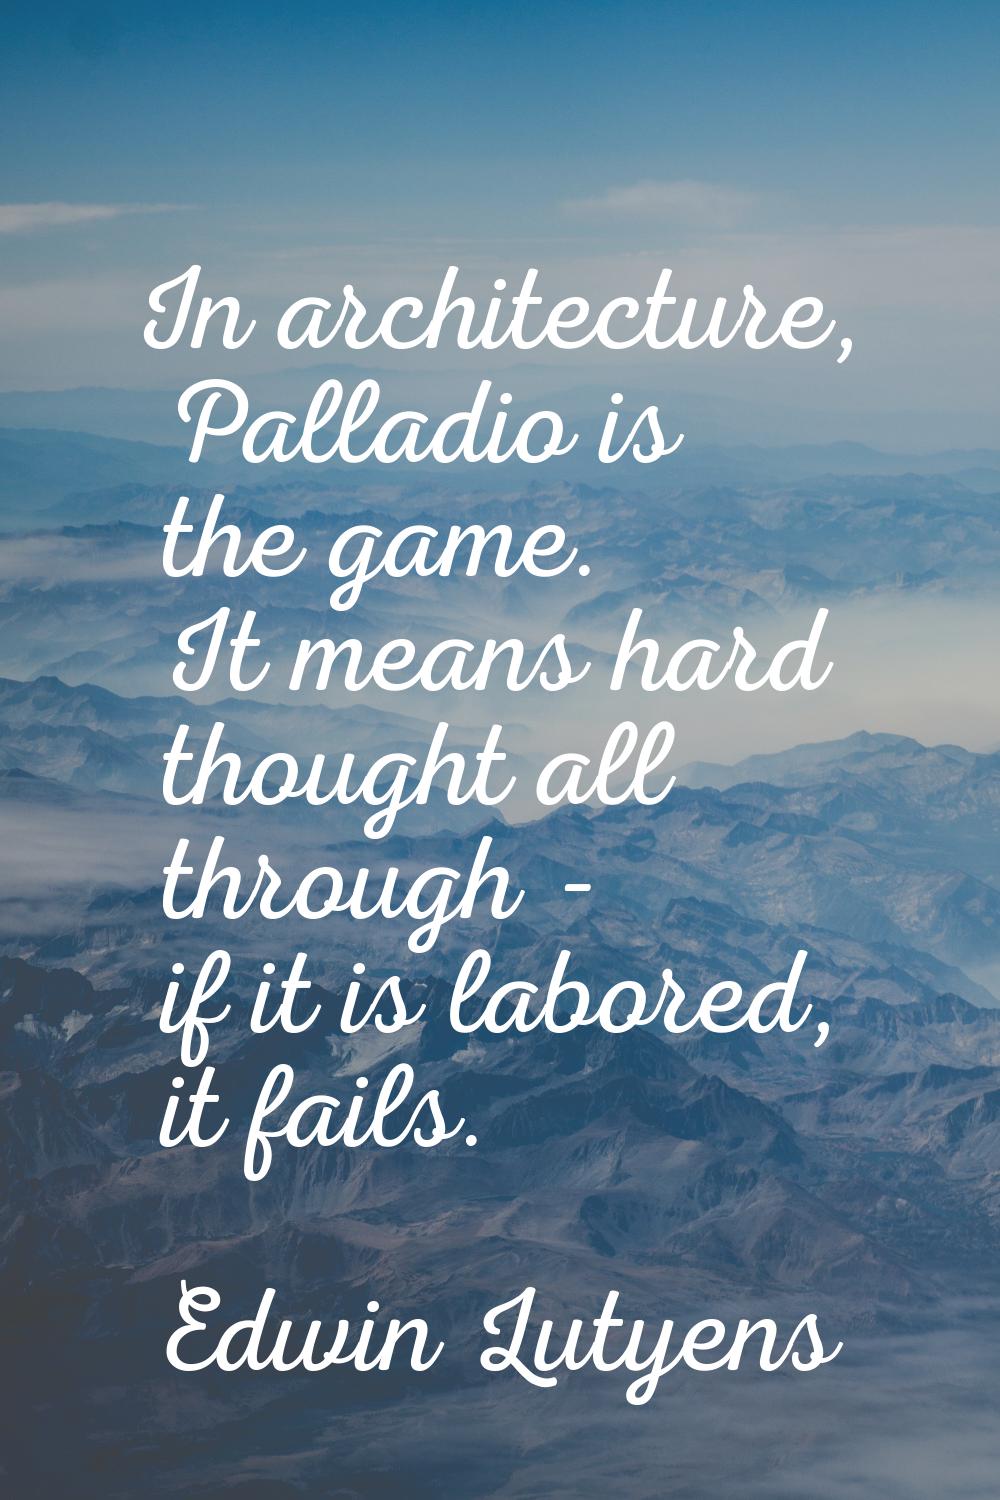 In architecture, Palladio is the game. It means hard thought all through - if it is labored, it fai